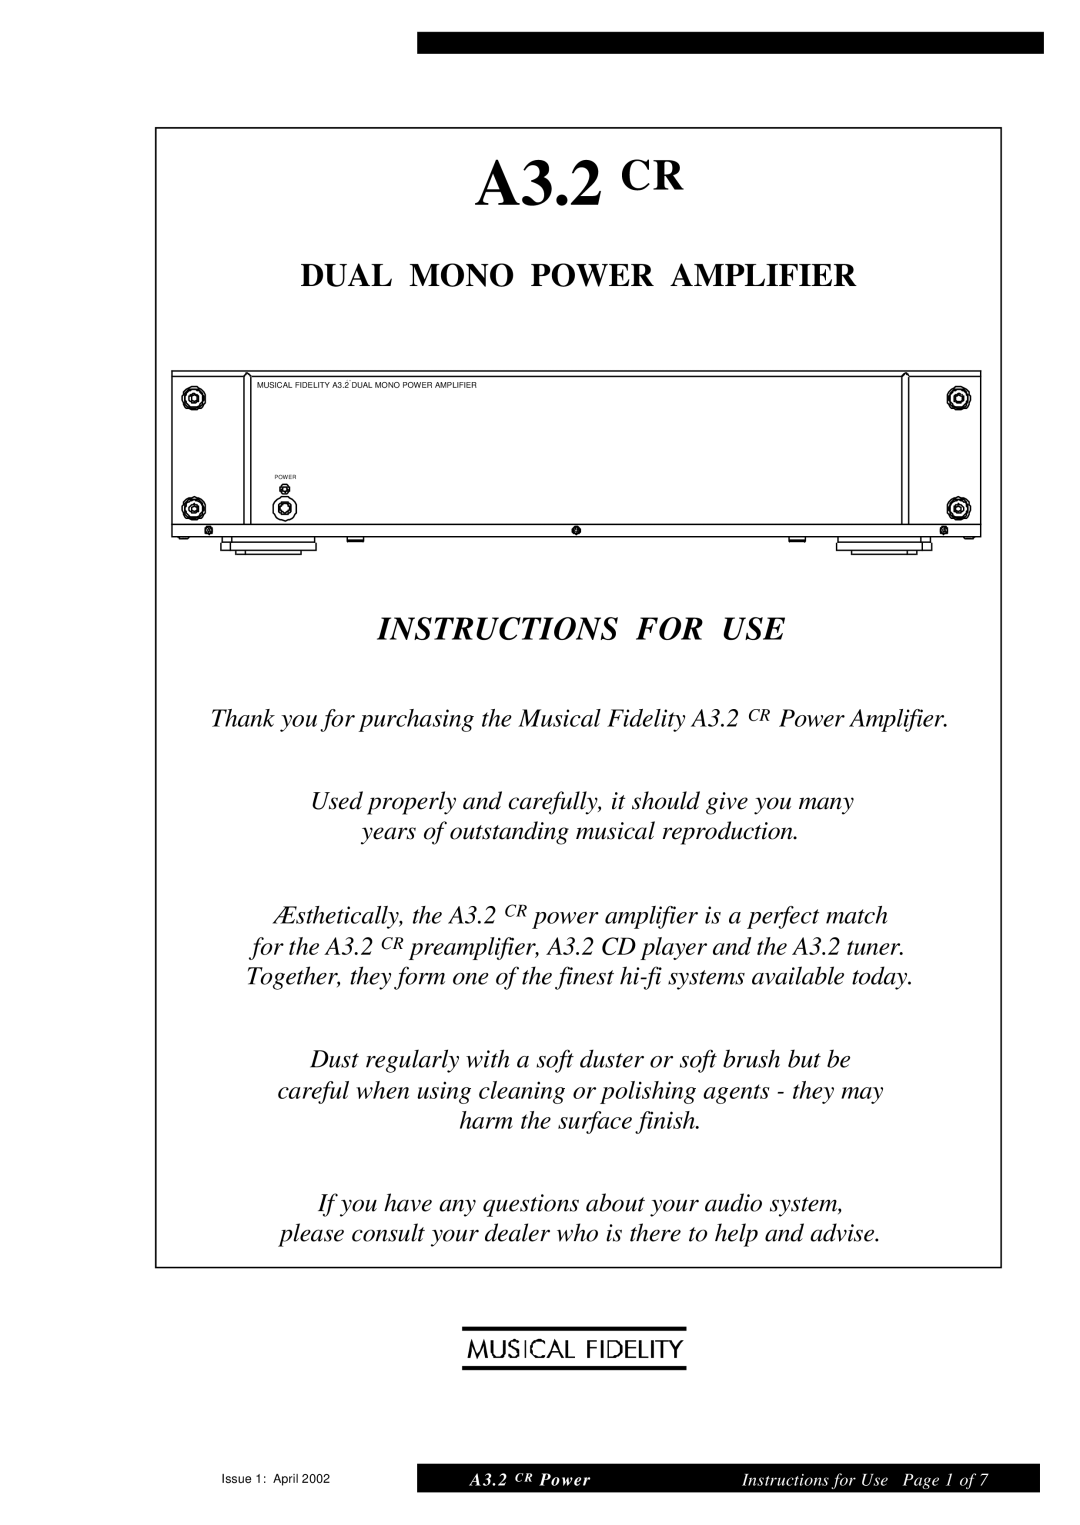 Musical Fidelity A3.2 CR manual Dual Mono Power Amplifier, Instructions For Use 